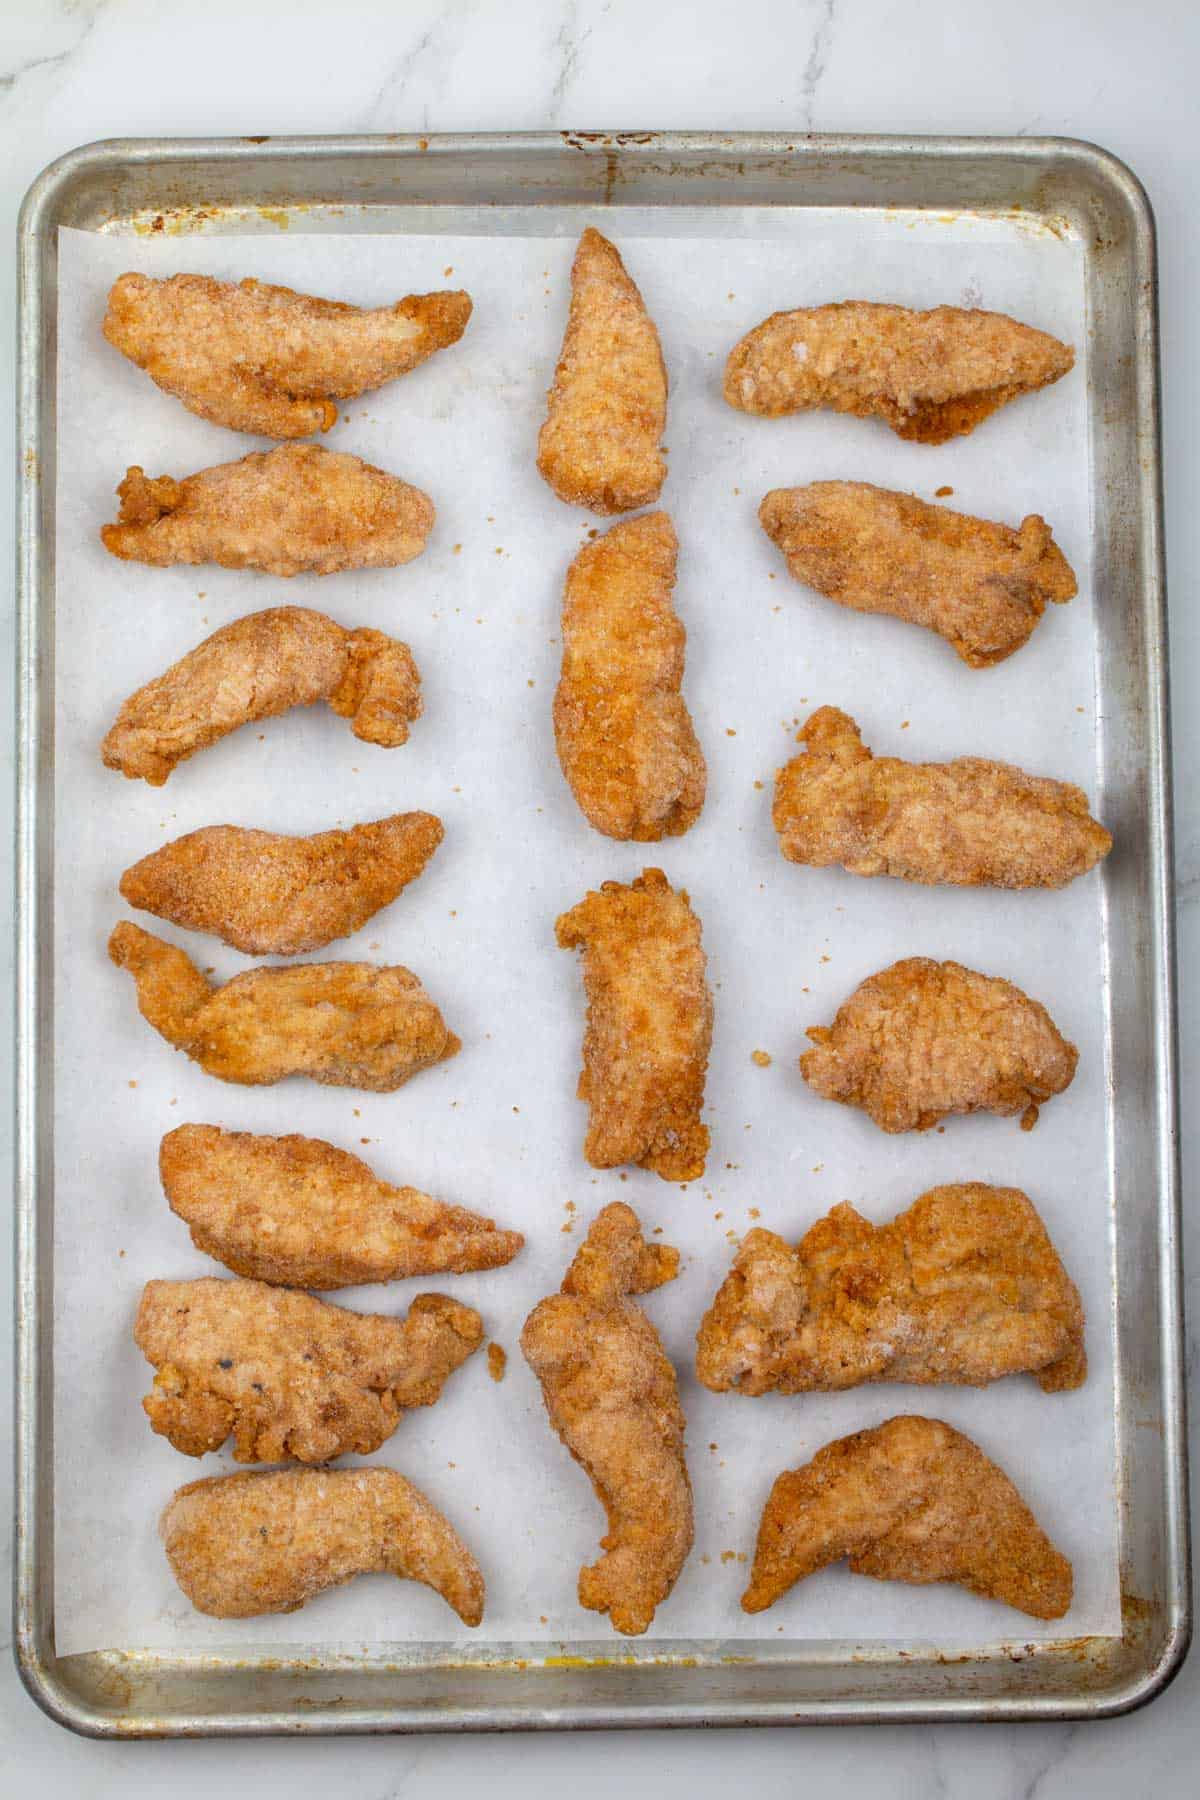 Chicken tenders on a parchment-lined baking sheet before cooking in oven.